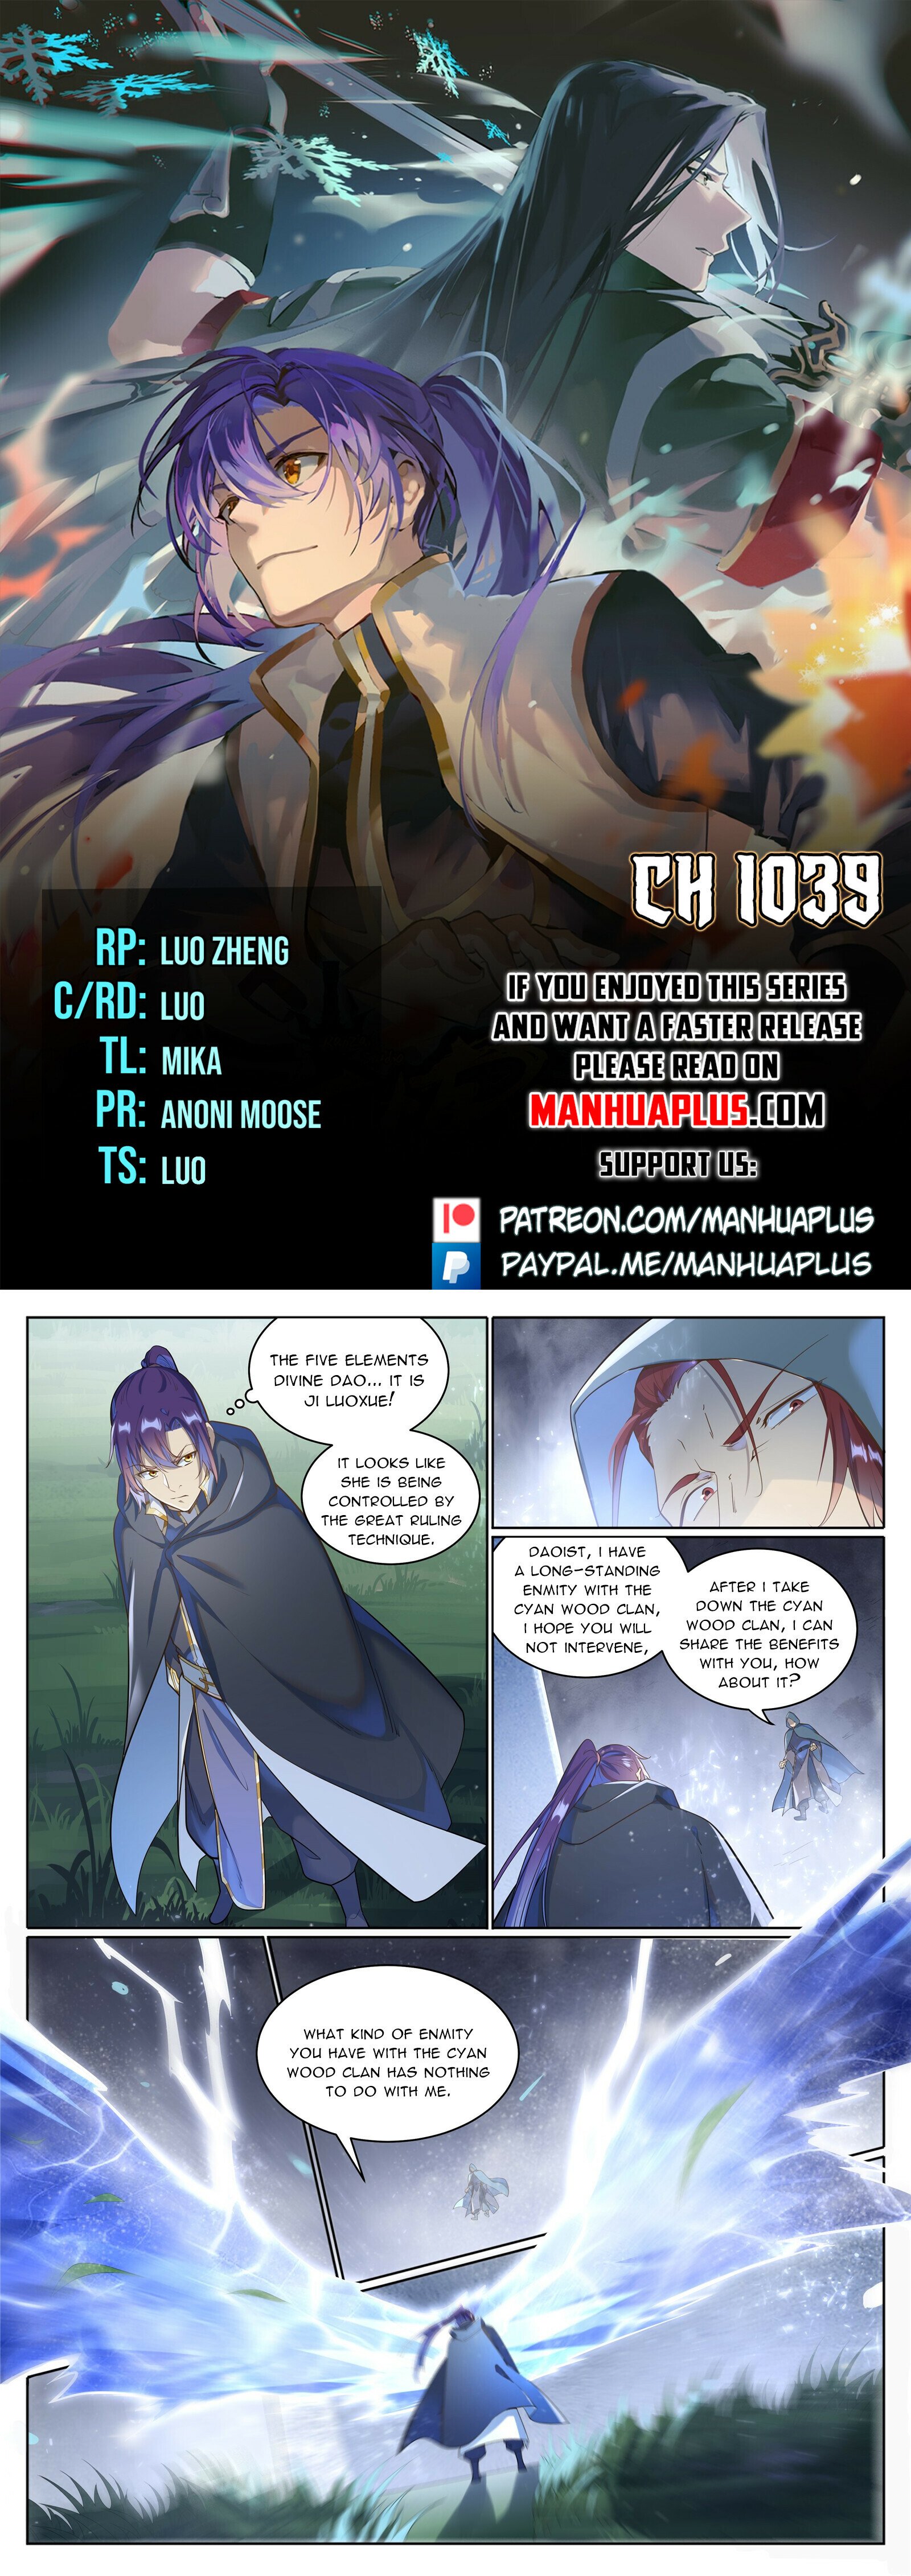 Apotheosis Chapter 1039 - Picture 1